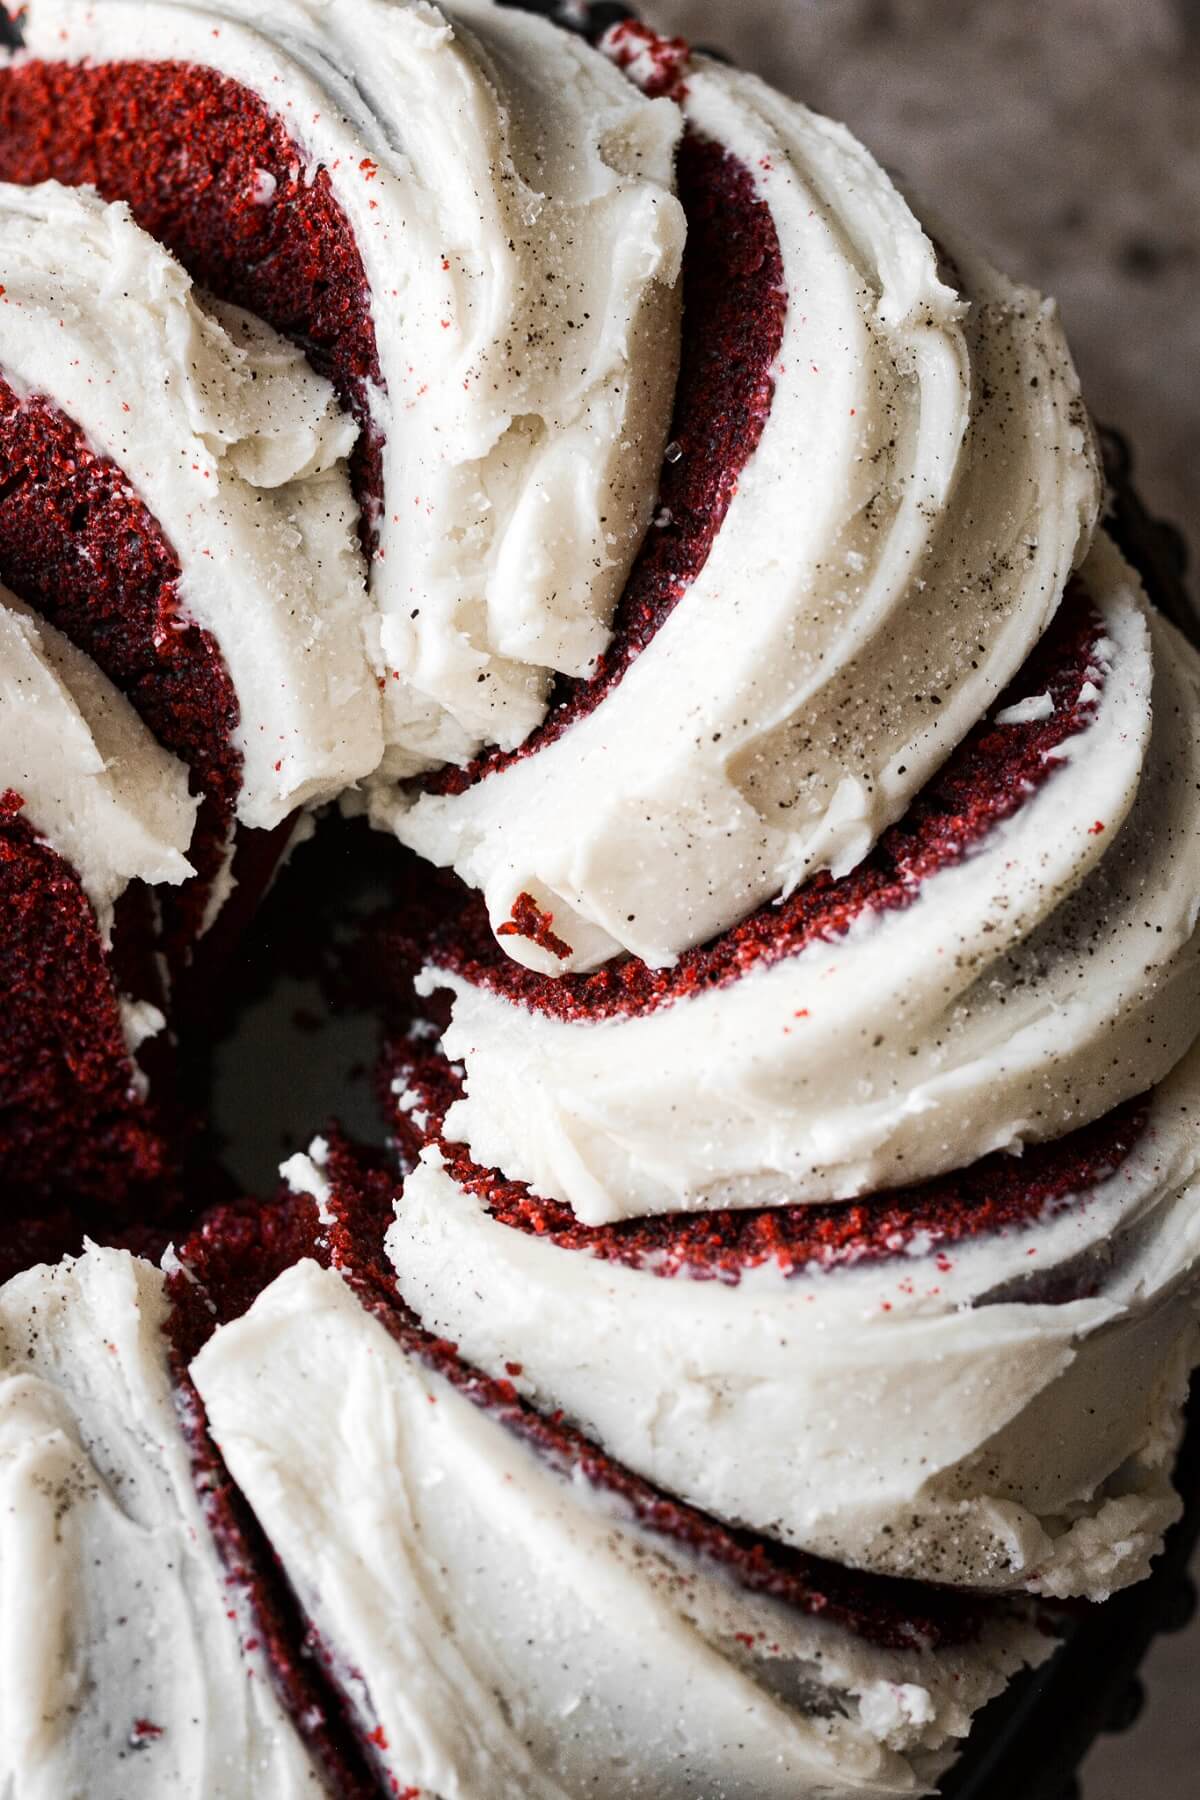 Slices of red velvet bundt cake with cream cheese frosting.